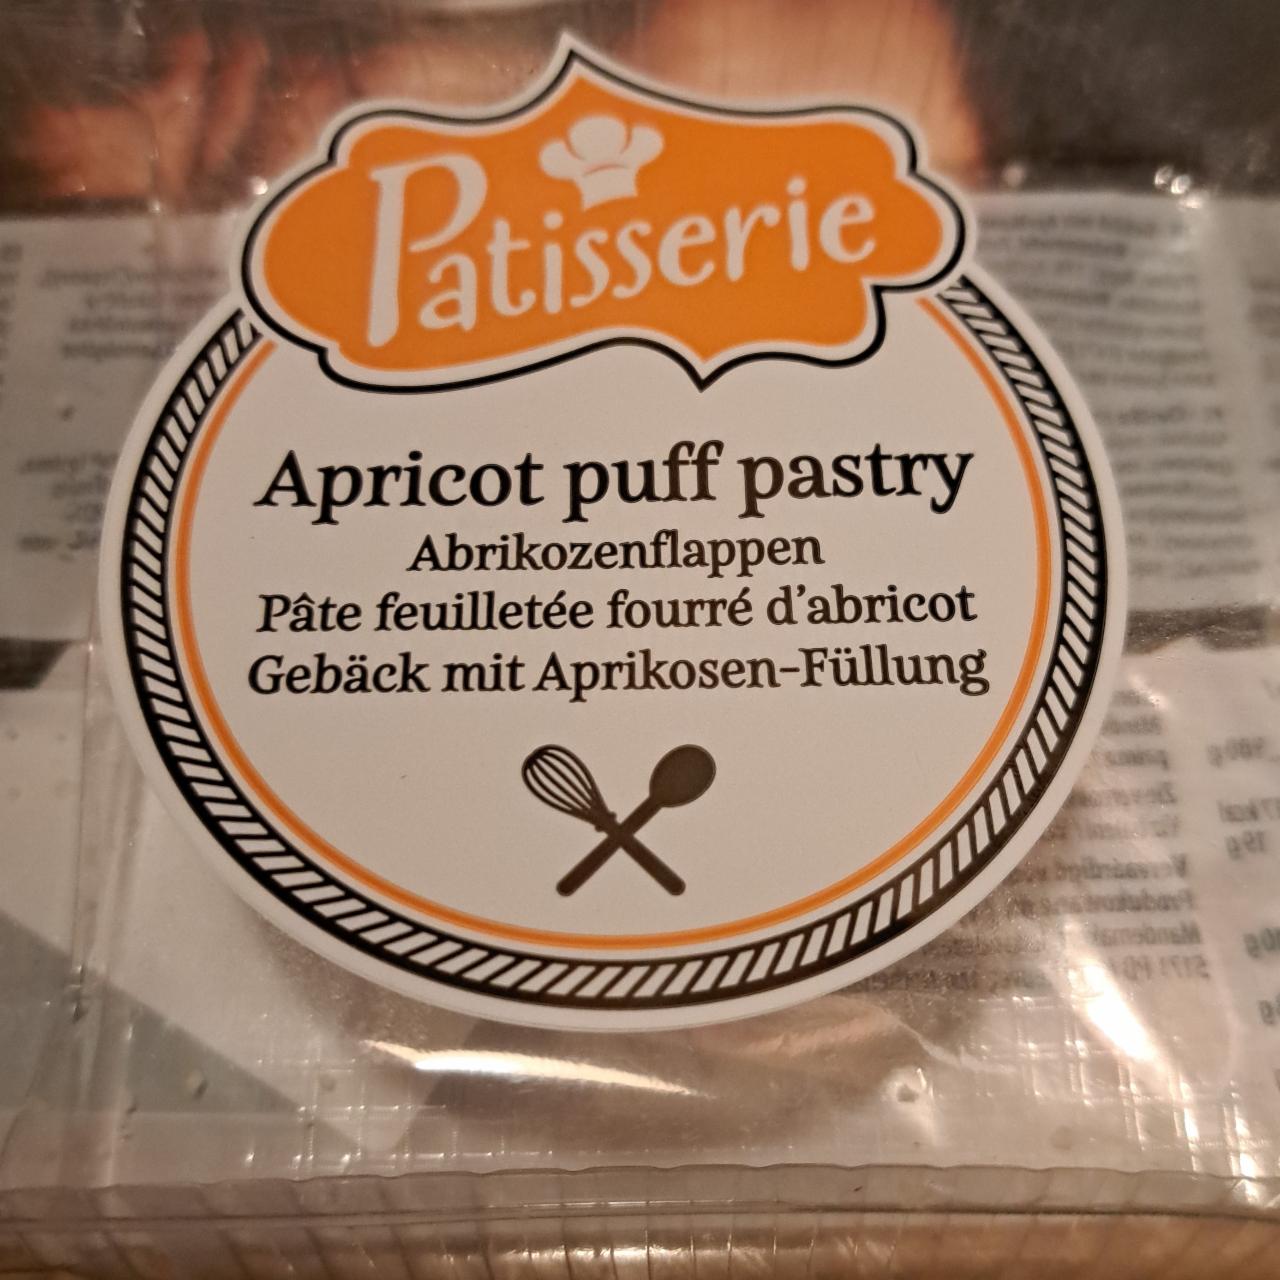 Fotografie - Apricot puff pastry Patisserie